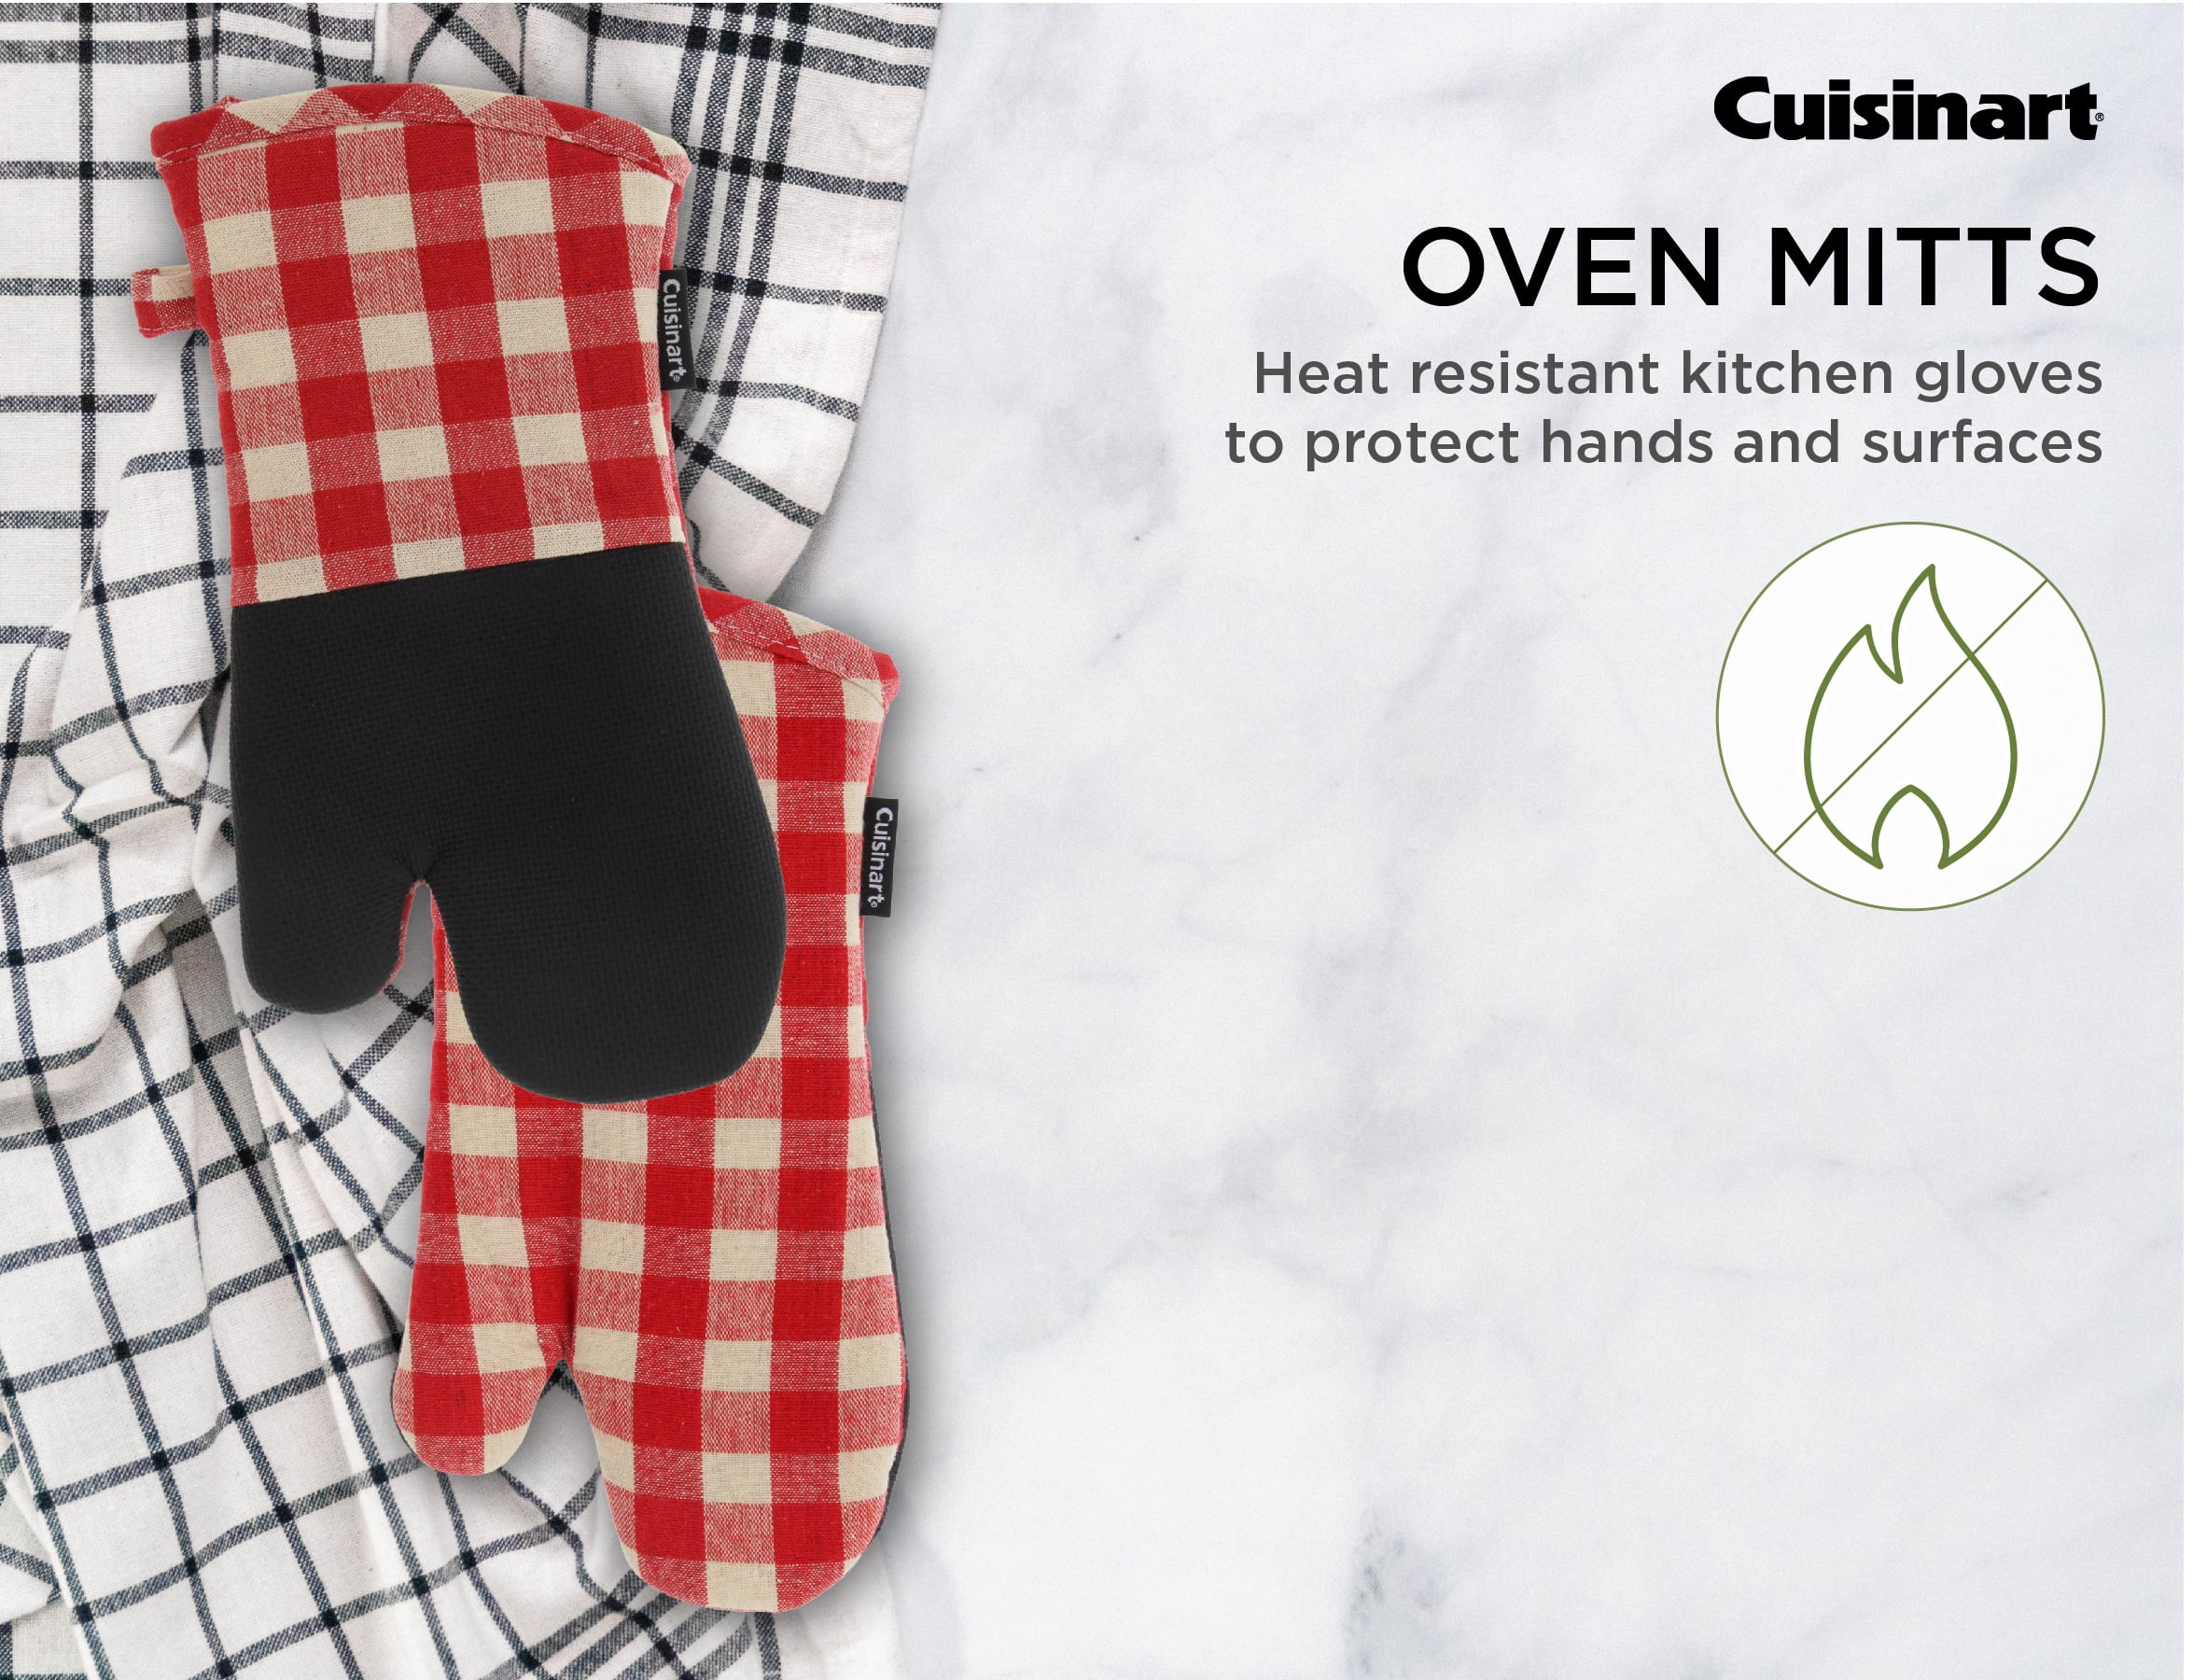  Cuisinart Buffalo Check Oven Mitt and Pot Holder Set - 2 Pack,  Slate and White Plaid Design - Handle Hot Kitchen Items Safely and Protect  Your Counter - Non-Slip Grip with